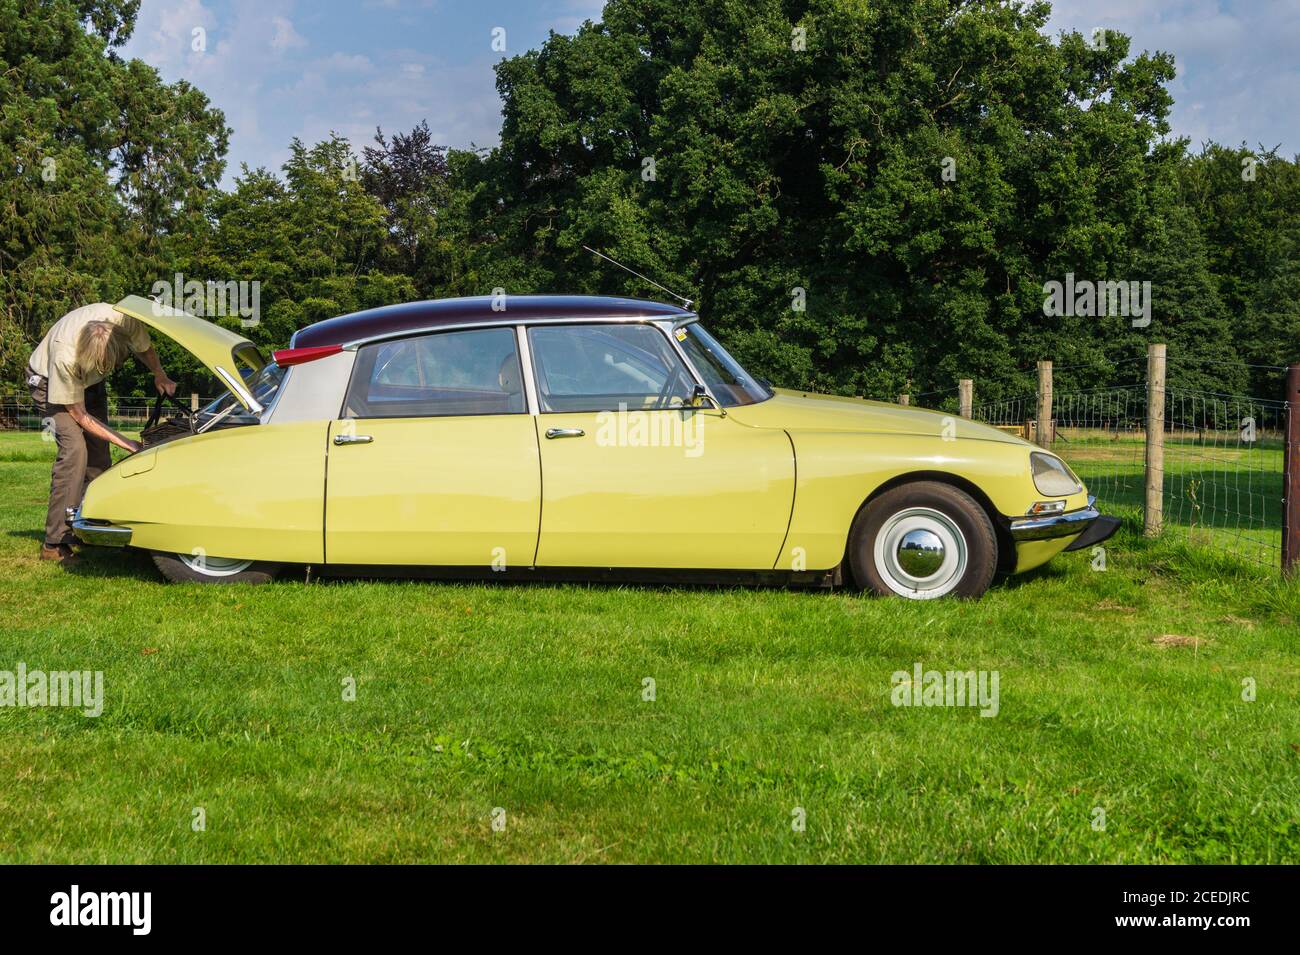 Modèle 1968 Citroën ID, Newby Hall, Yorkshire, Angleterre Banque D'Images